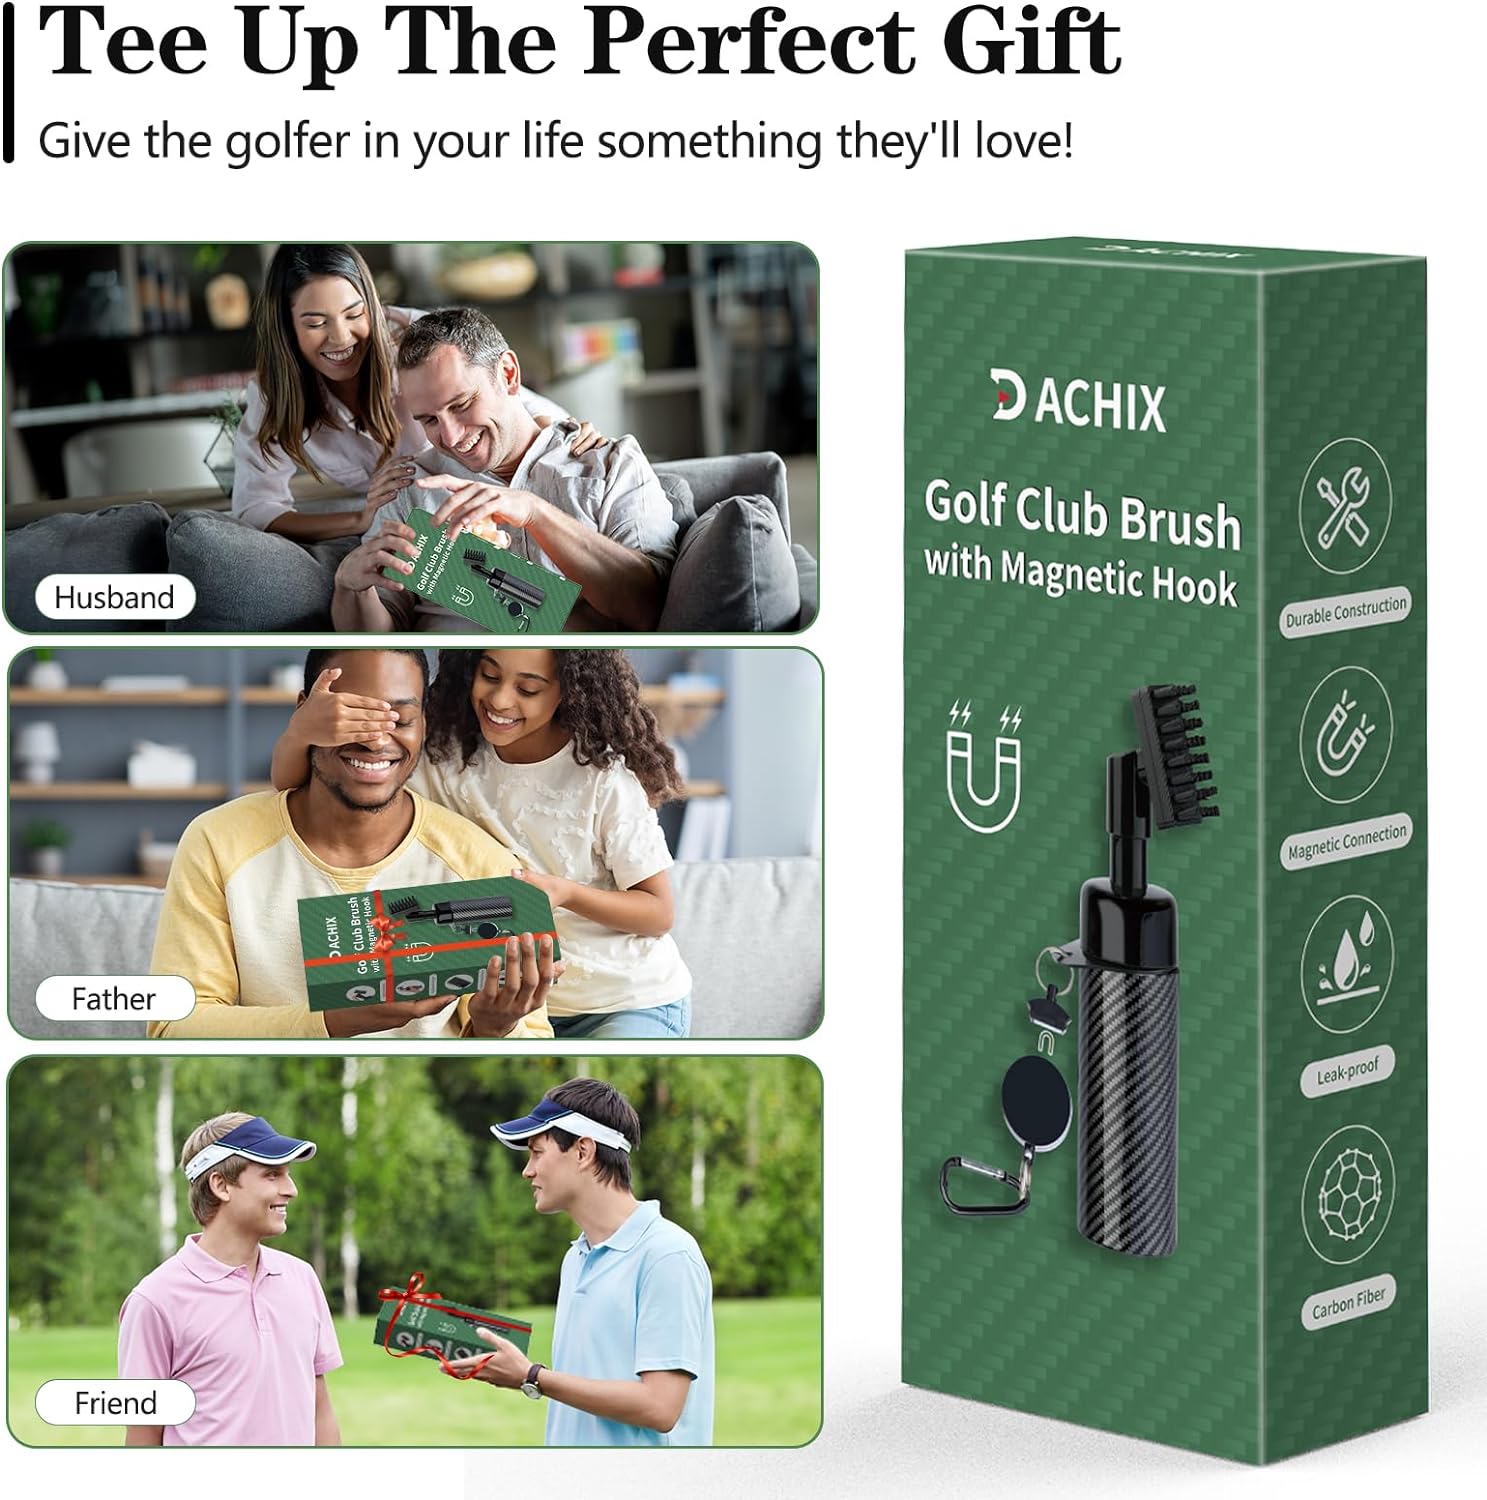 Golf Club Cleaning Brush with Magnetic Clip, 8 Carbon Fiber Golf Club Brush Holds 5oz Water with Press Spray Design, A Must Have Golf Accessories for Men and Best Golf Gift for